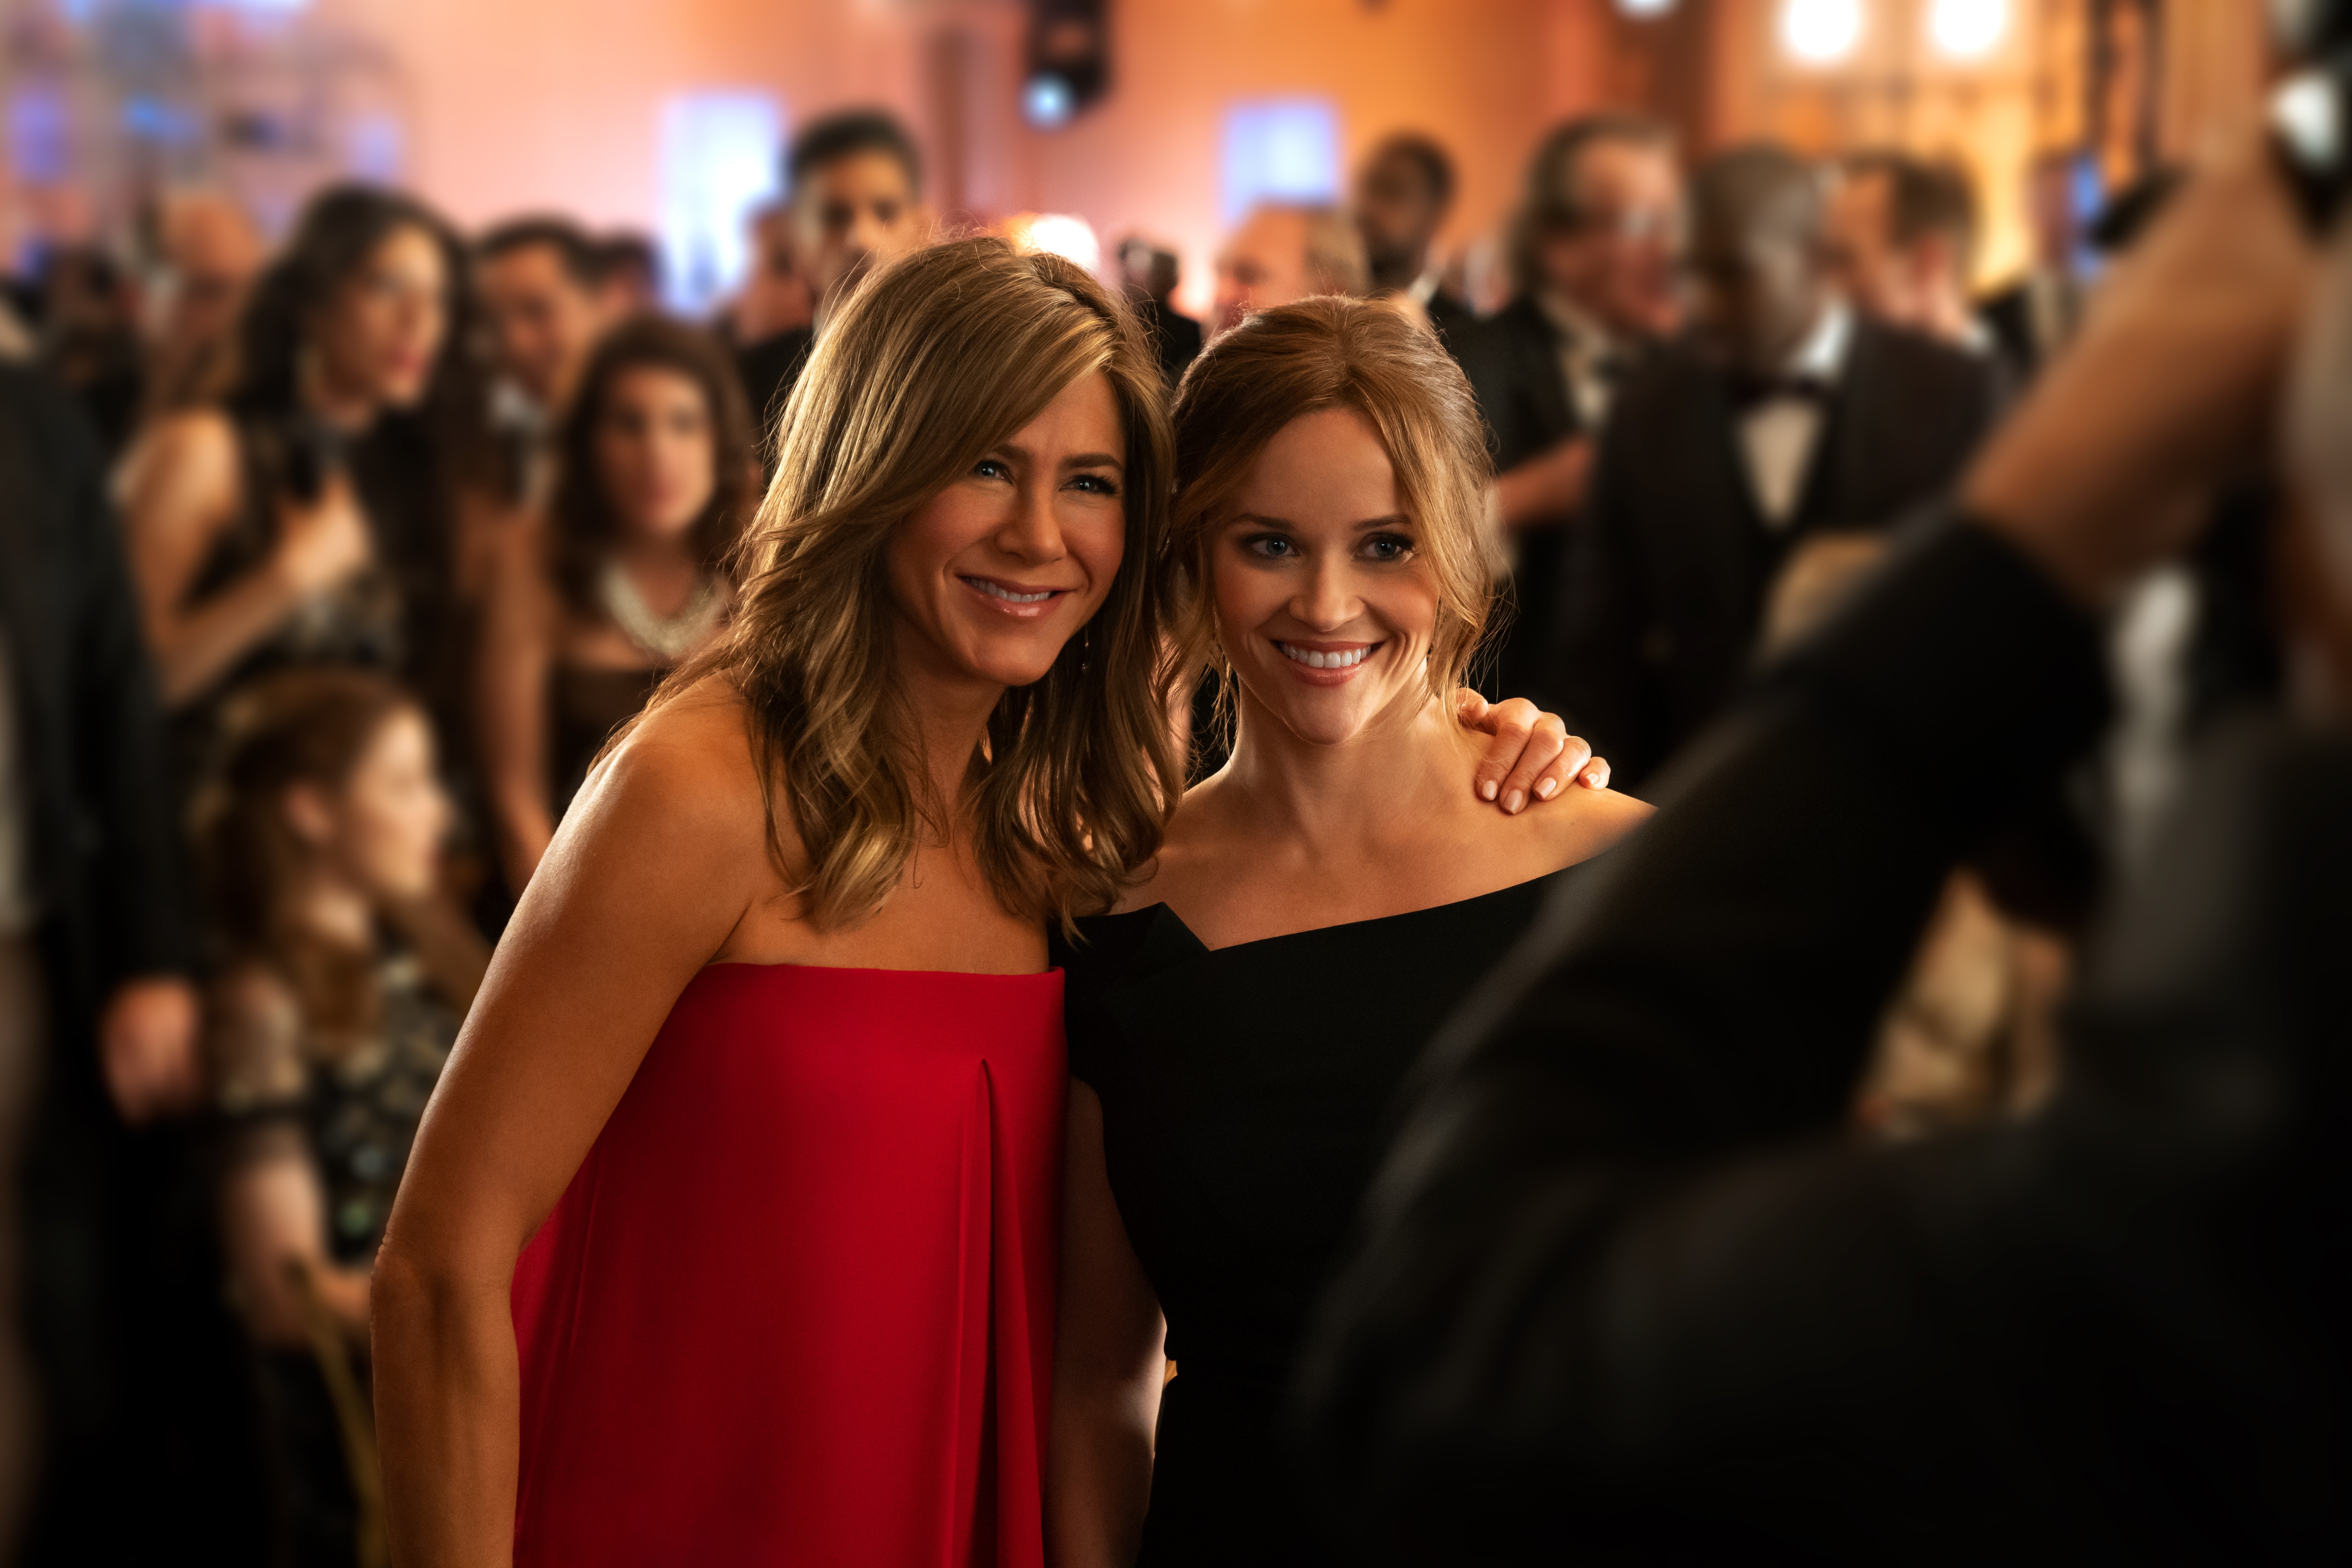 Jennifer Aniston e Reese Witherspoon em The Morning Show (Foto: AppleTV)